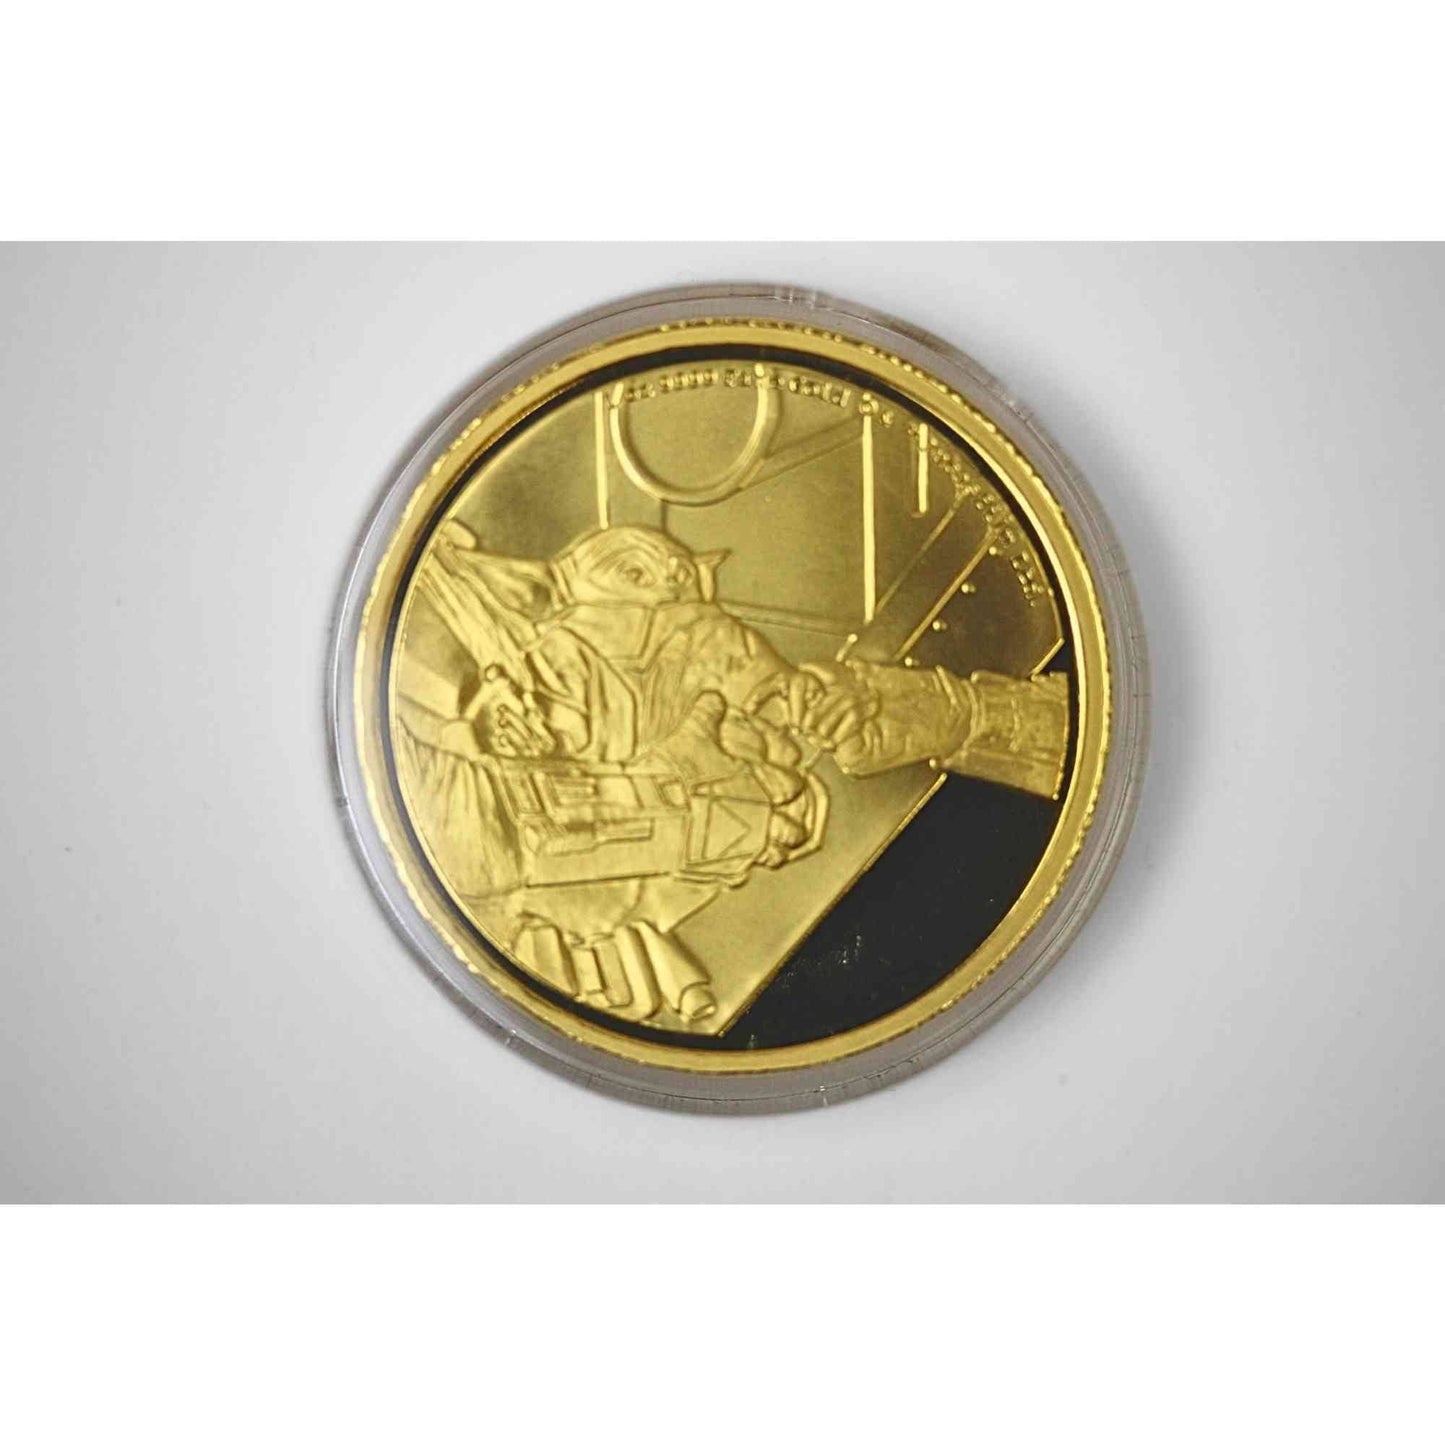 2022 Grogu 1 oz Limited Edition Gold Coin